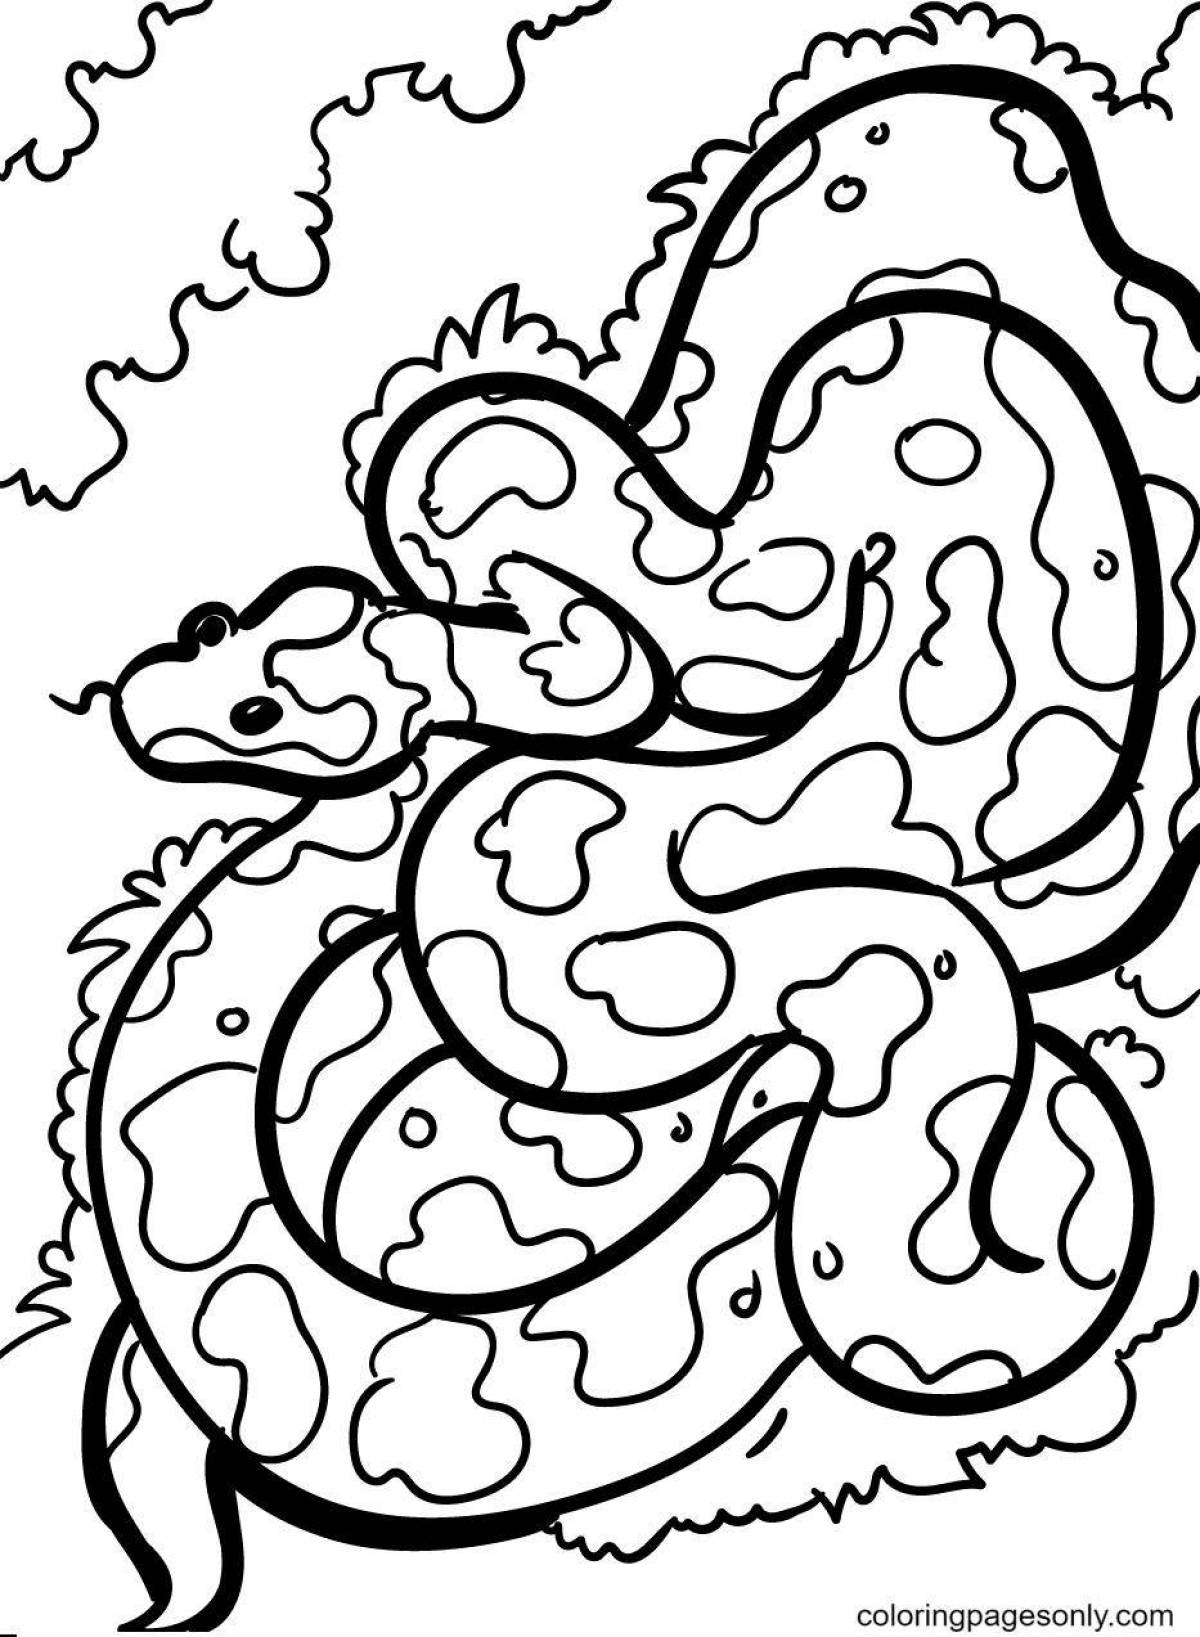 Adorable snake coloring by numbers